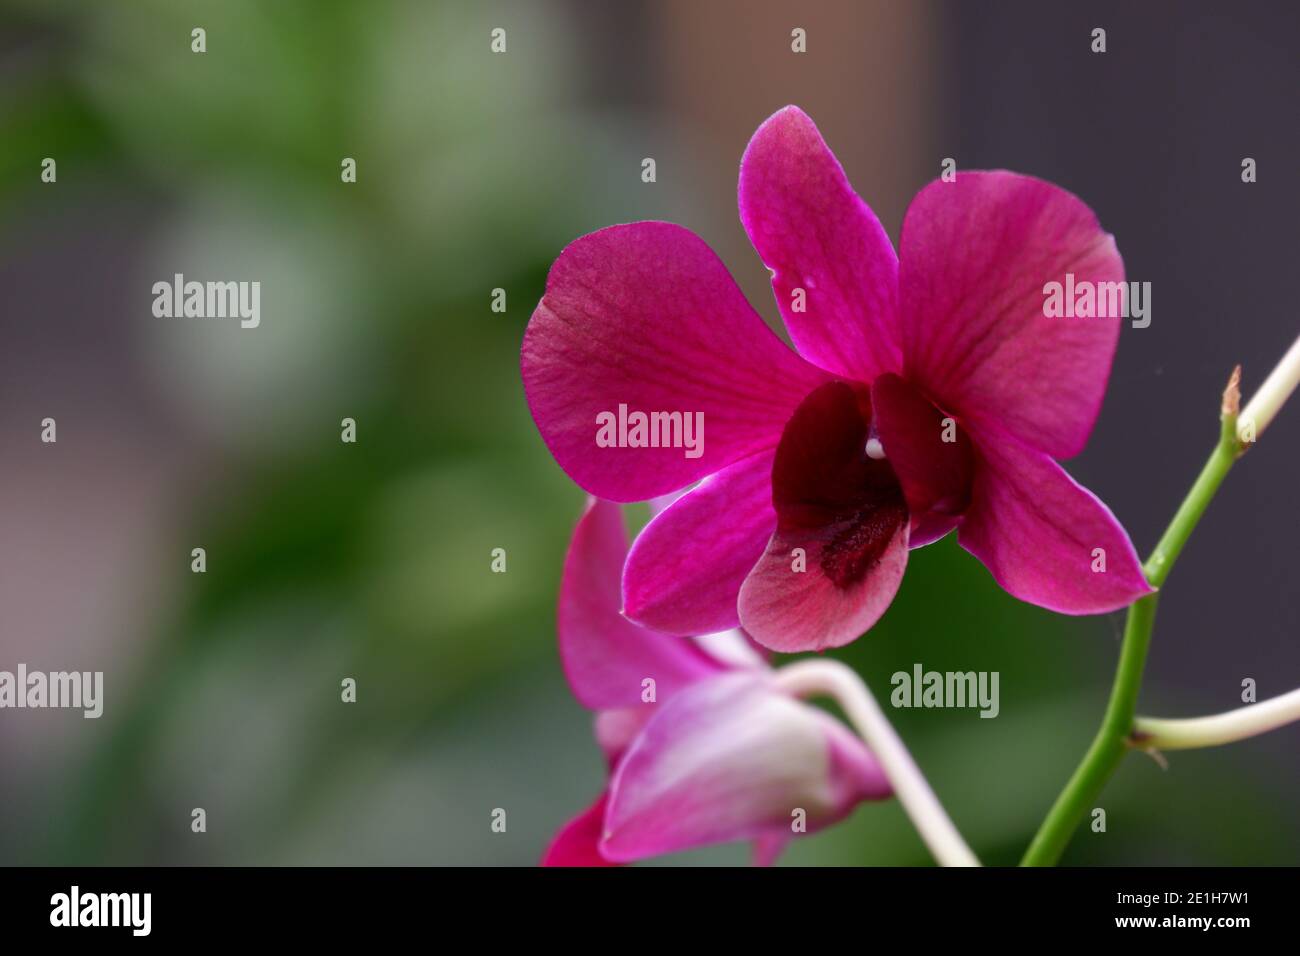 close up image of beautiful purple dendrobium orchid flowers isolated on blur background Stock Photo